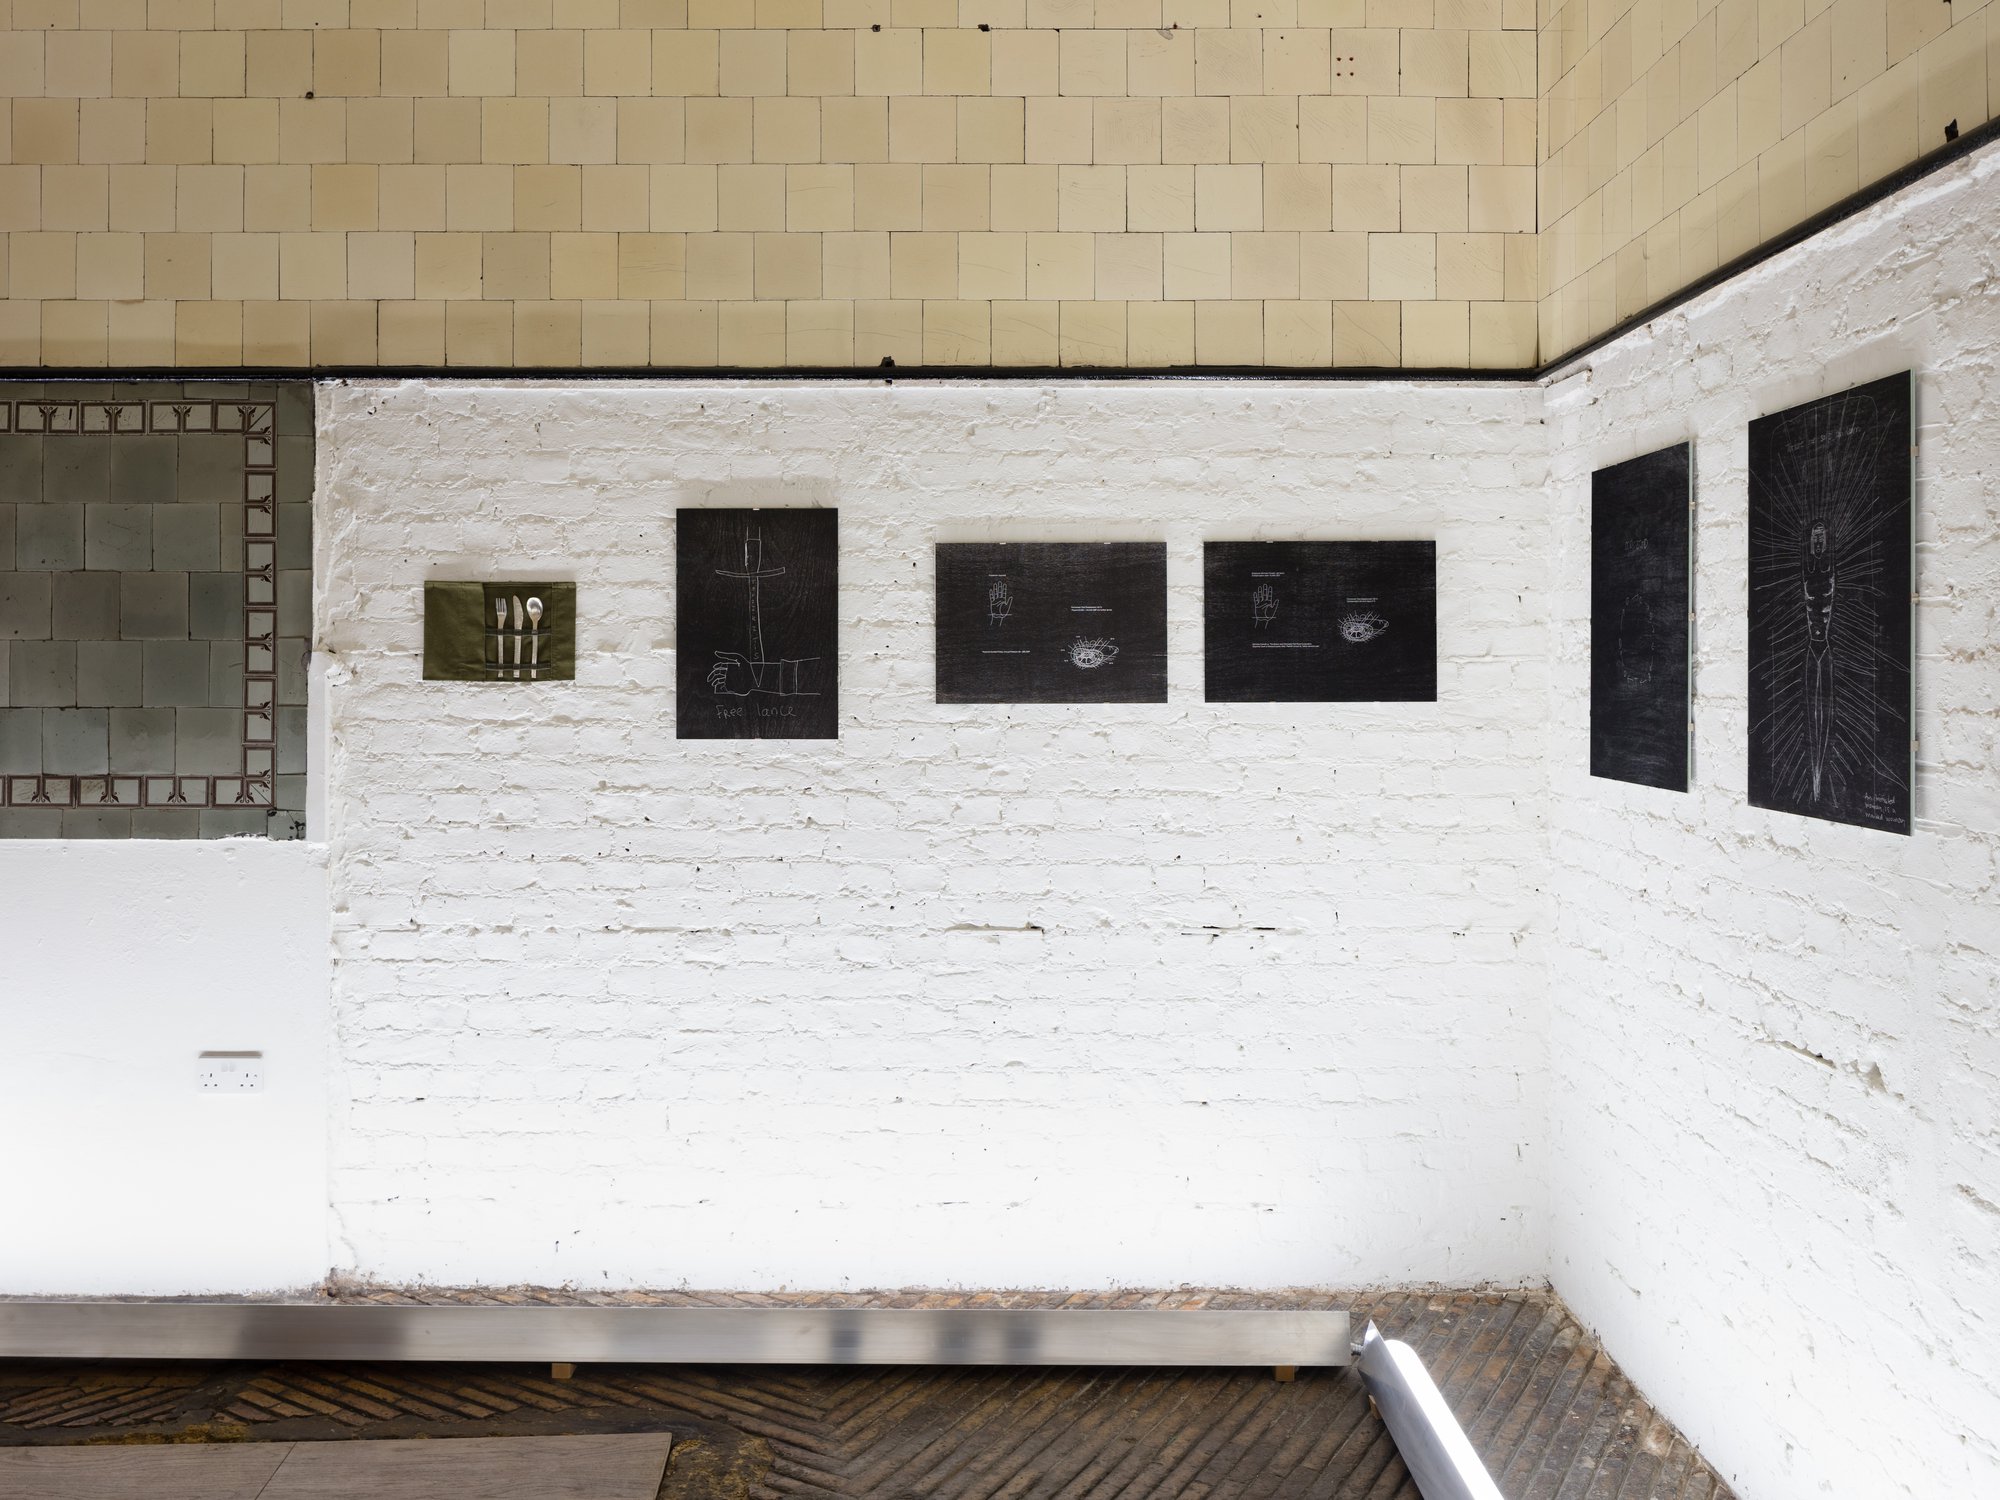 Installation view, Sidsel Meineche Hansen, home vs owner, Rodeo, London, 2020